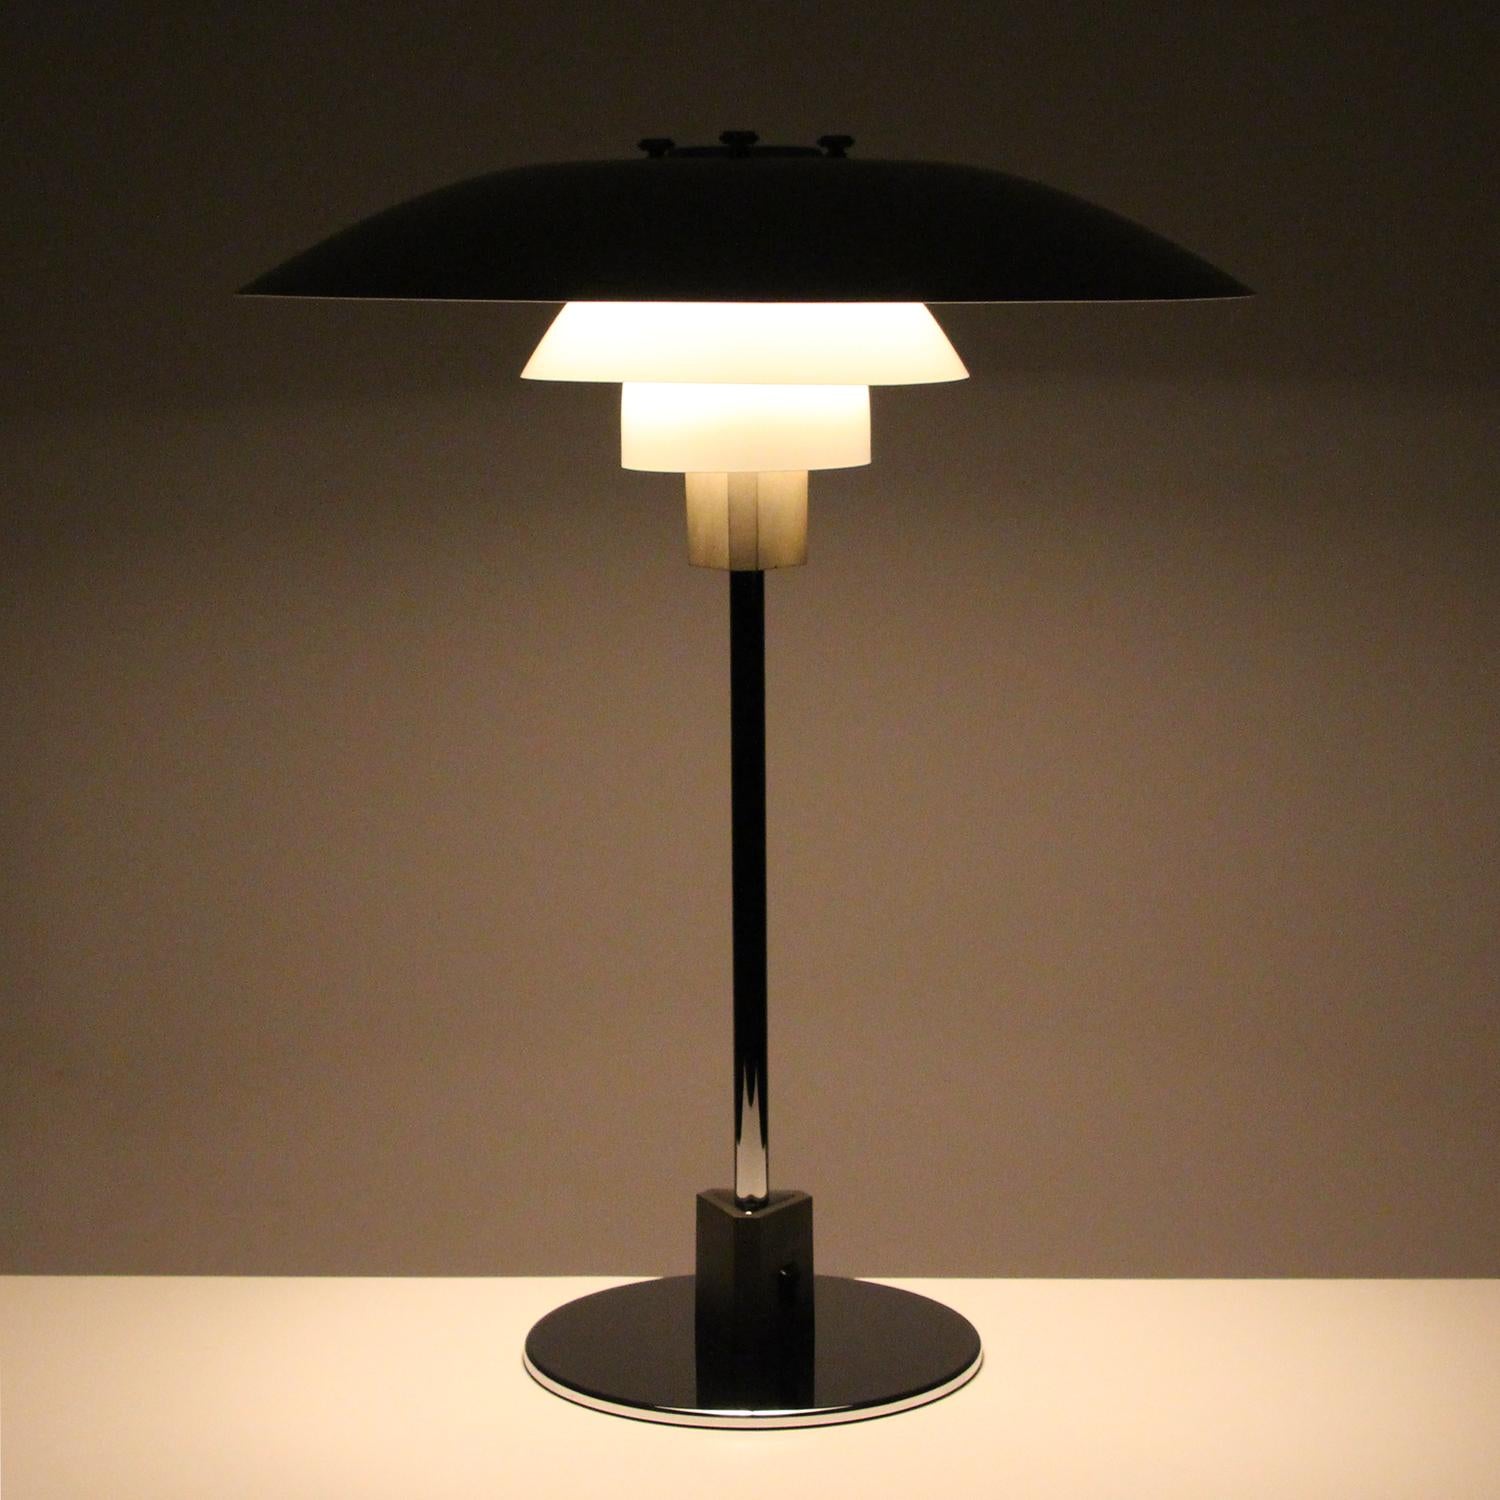 PH 4/3 table lamp by Poul Henningsen (PH) for Louis Poulsen in 1966 - classic large white desk light - in very good vintage condition.

A super stylish table lamp, comprised of a circular chromed-plated brass base with a black molded Bakelite